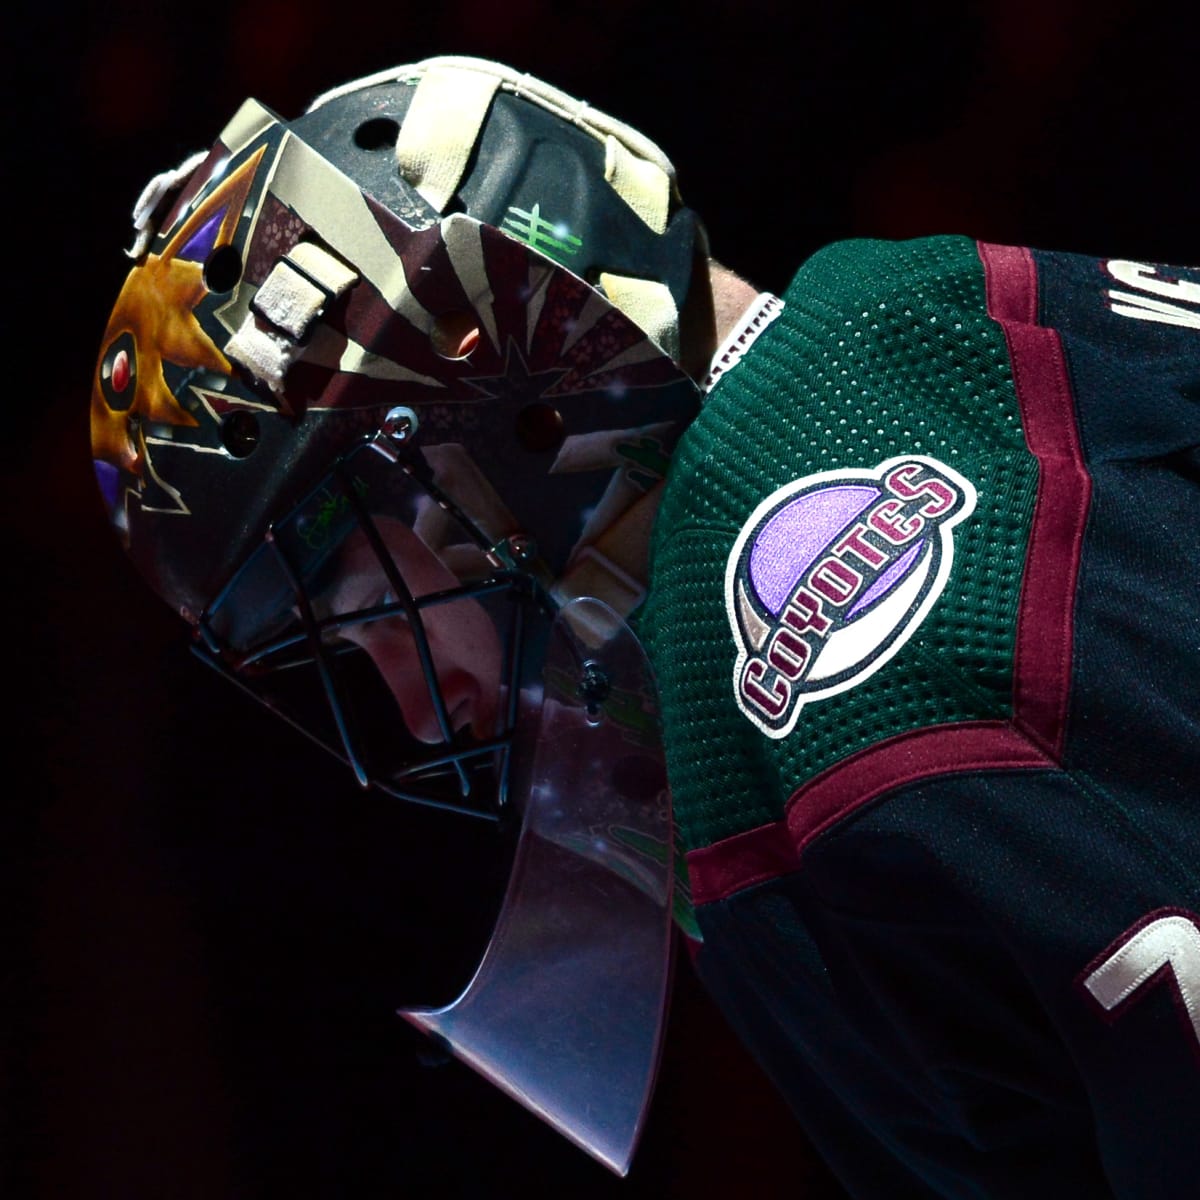 Gila River Arena: NHL's Arizona Coyotes could be locked out of their home  arena starting December 20 if bills aren't paid